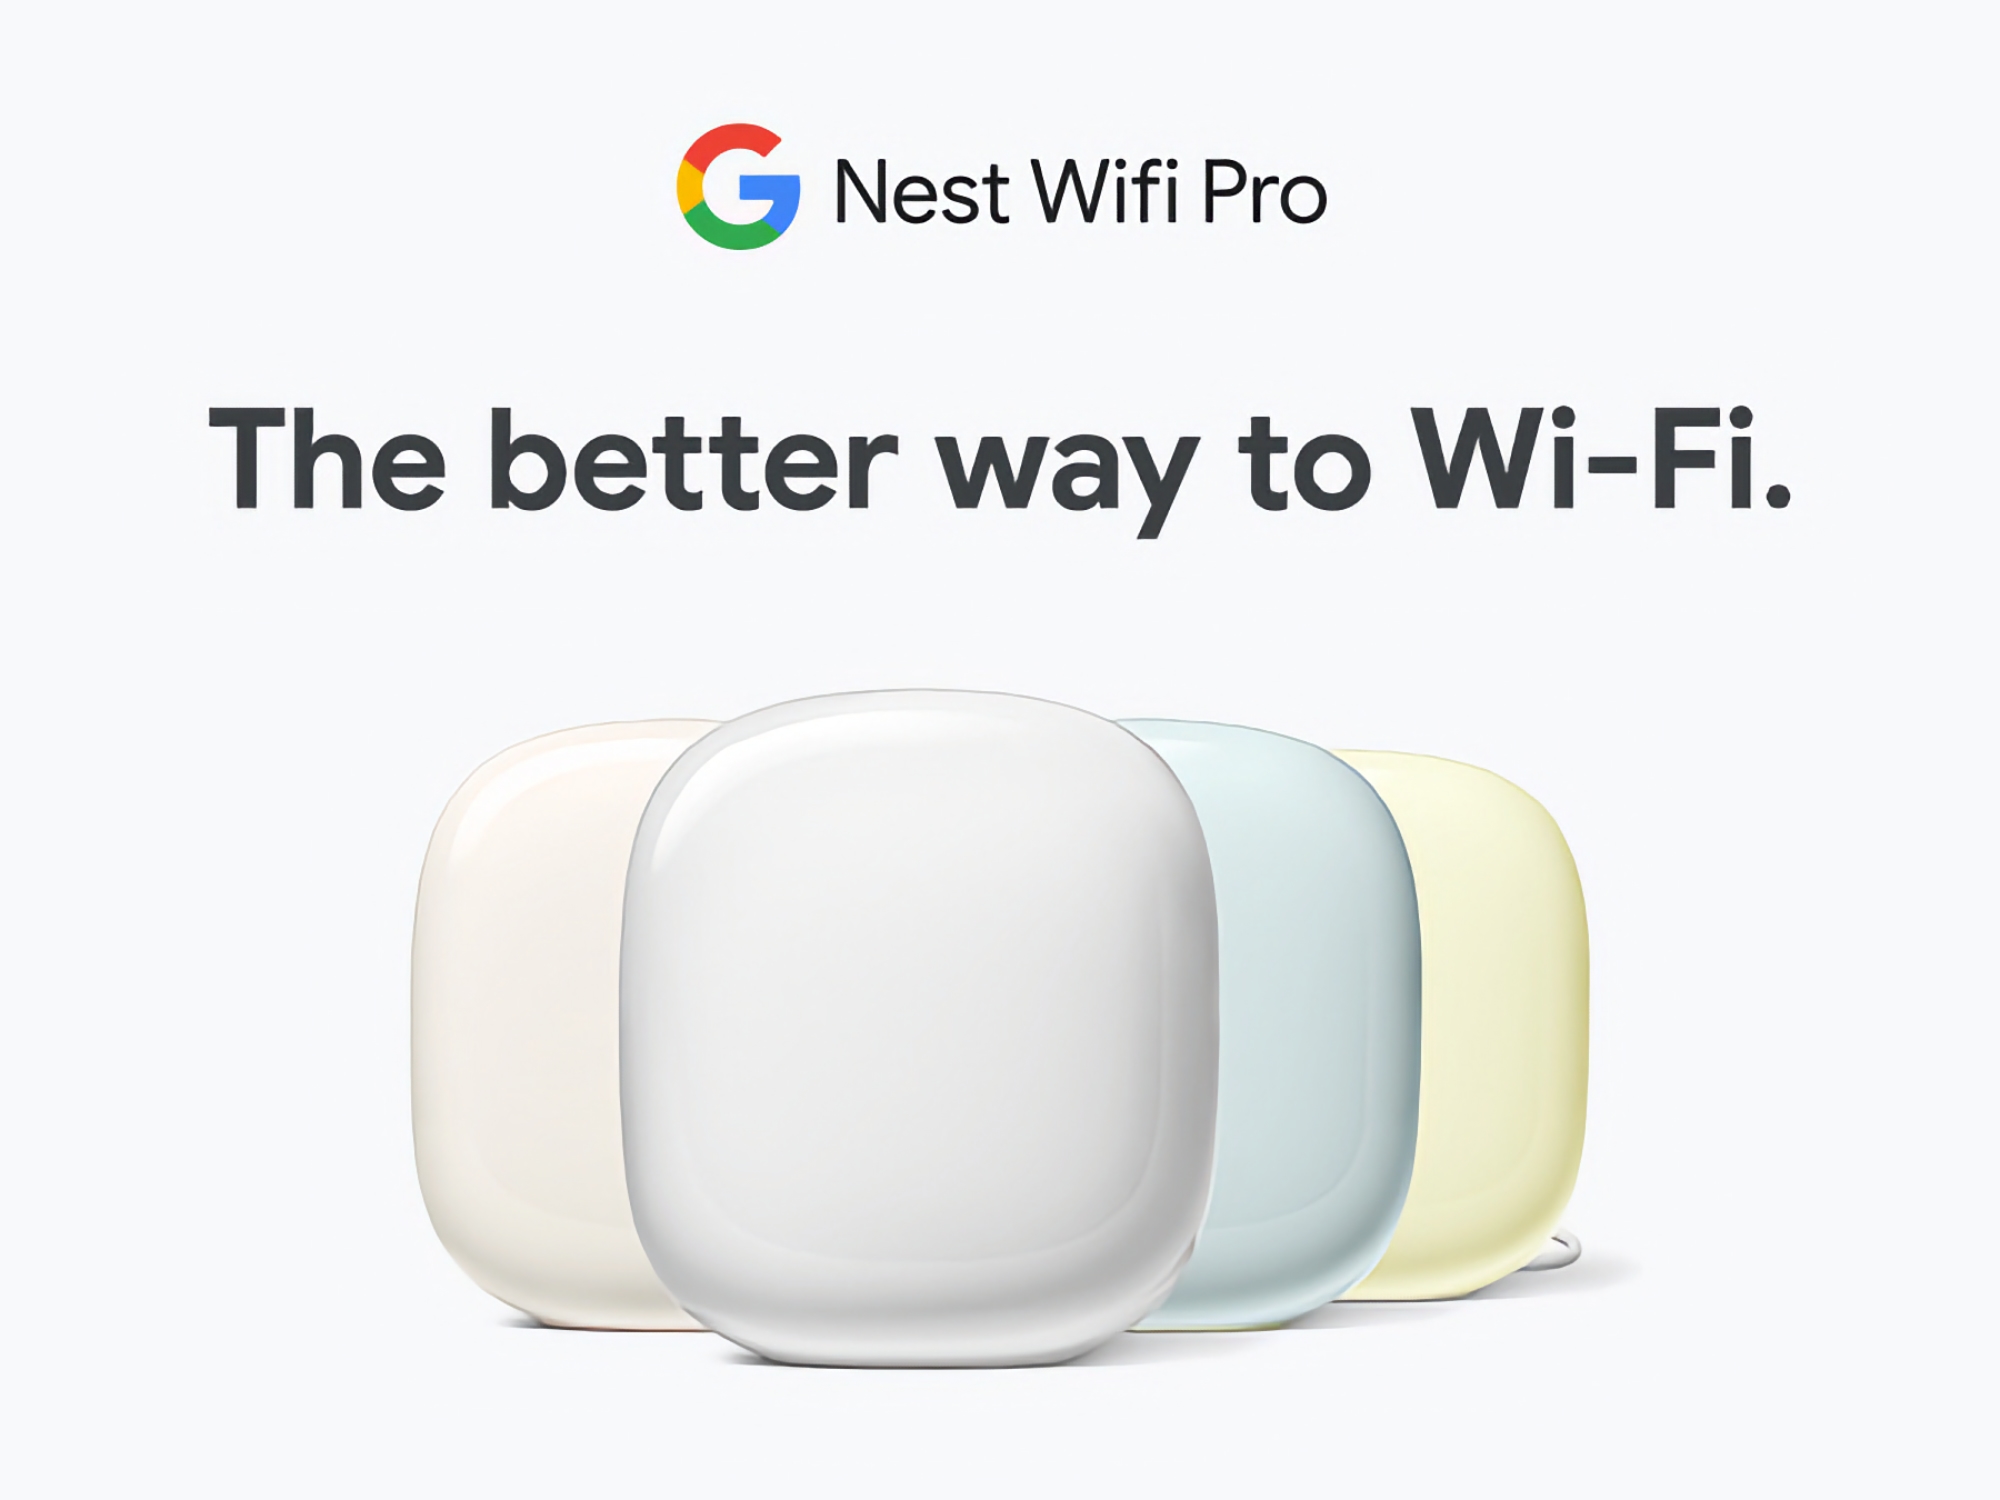 Google Nest WiFi Pro with tri-band and Wi-Fi 6E available on